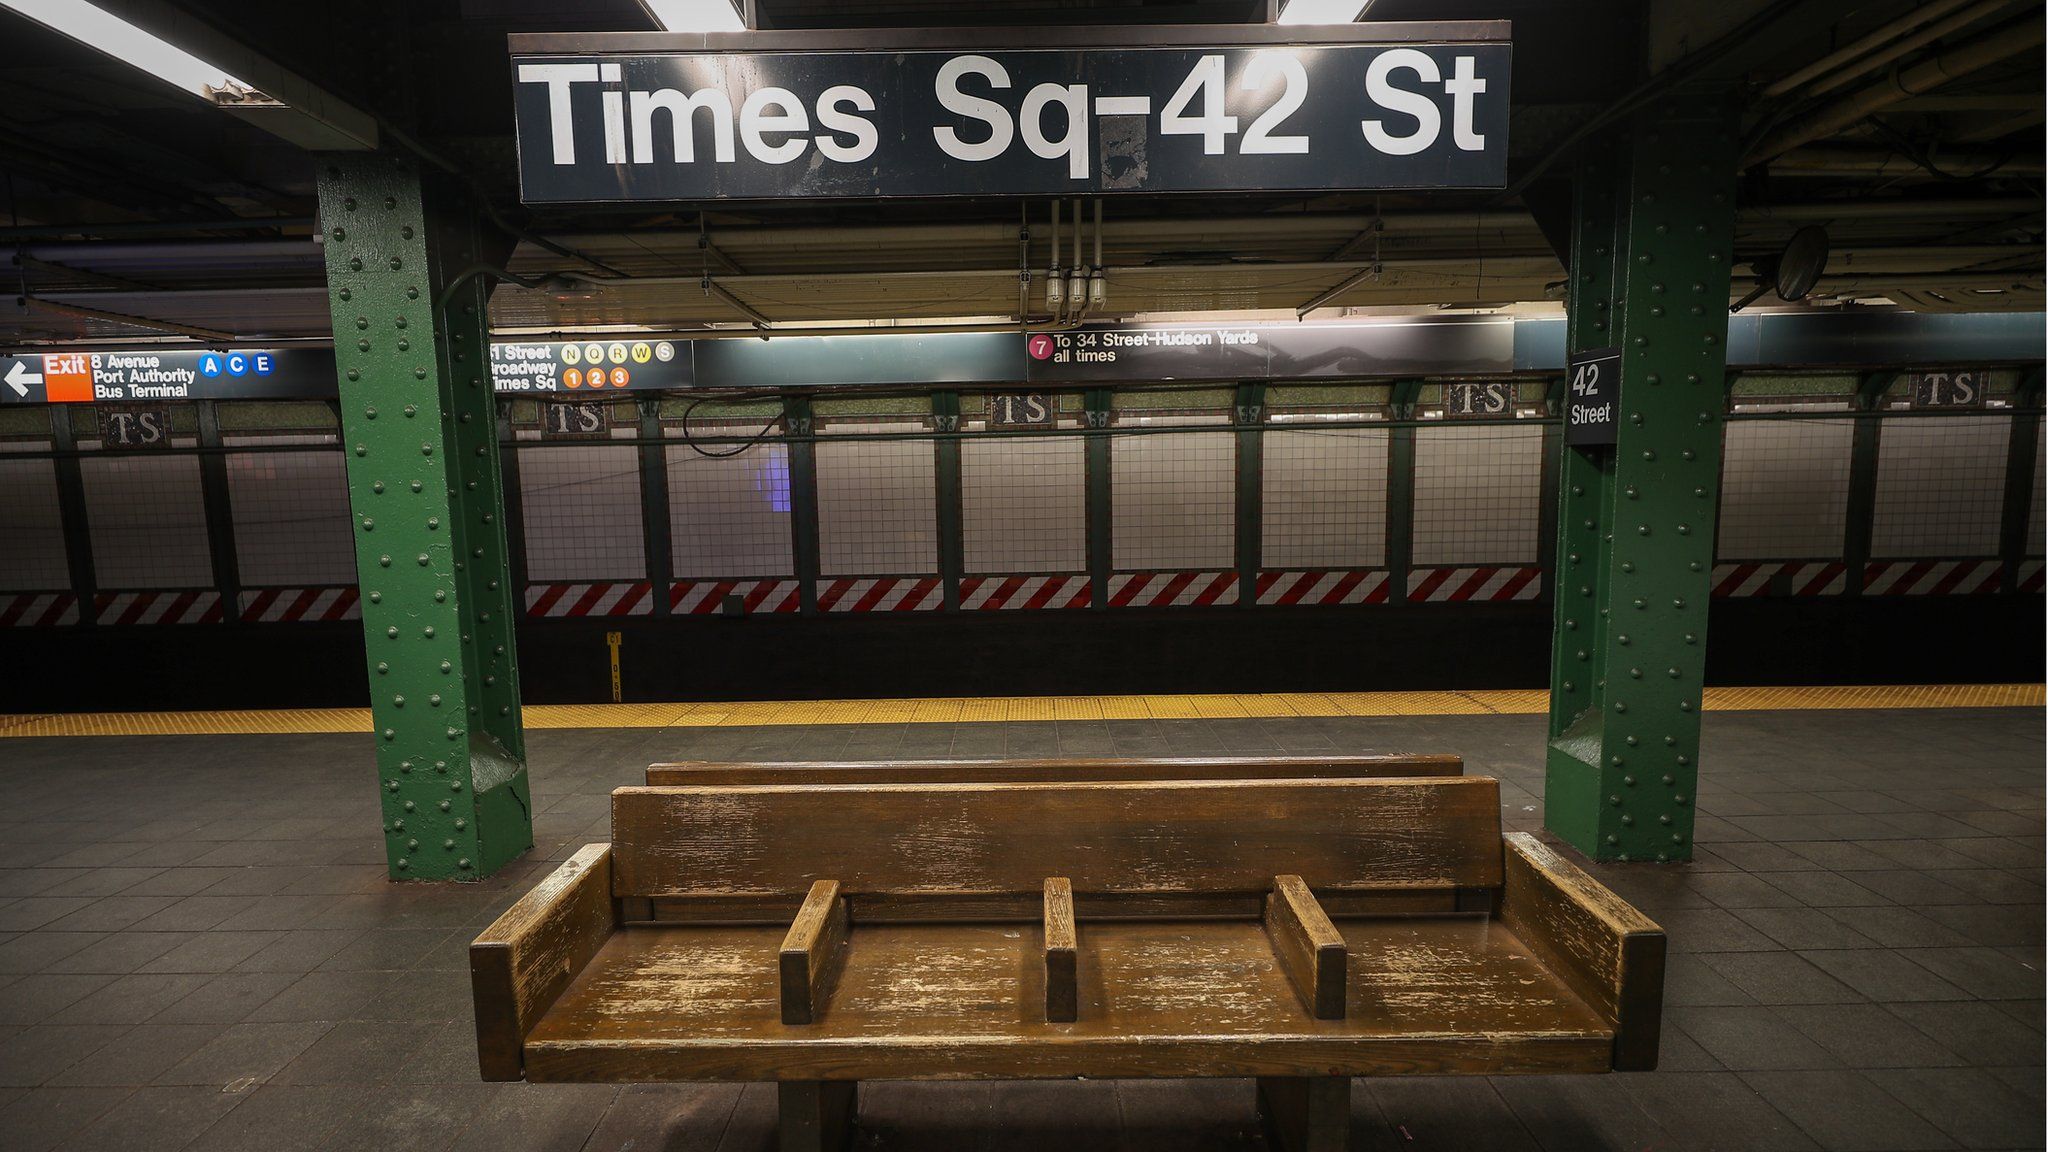 New York City subway is seen nearly empty due to coronavirus (Covid-19) pandemic on March 16, 2020 in New York, United States